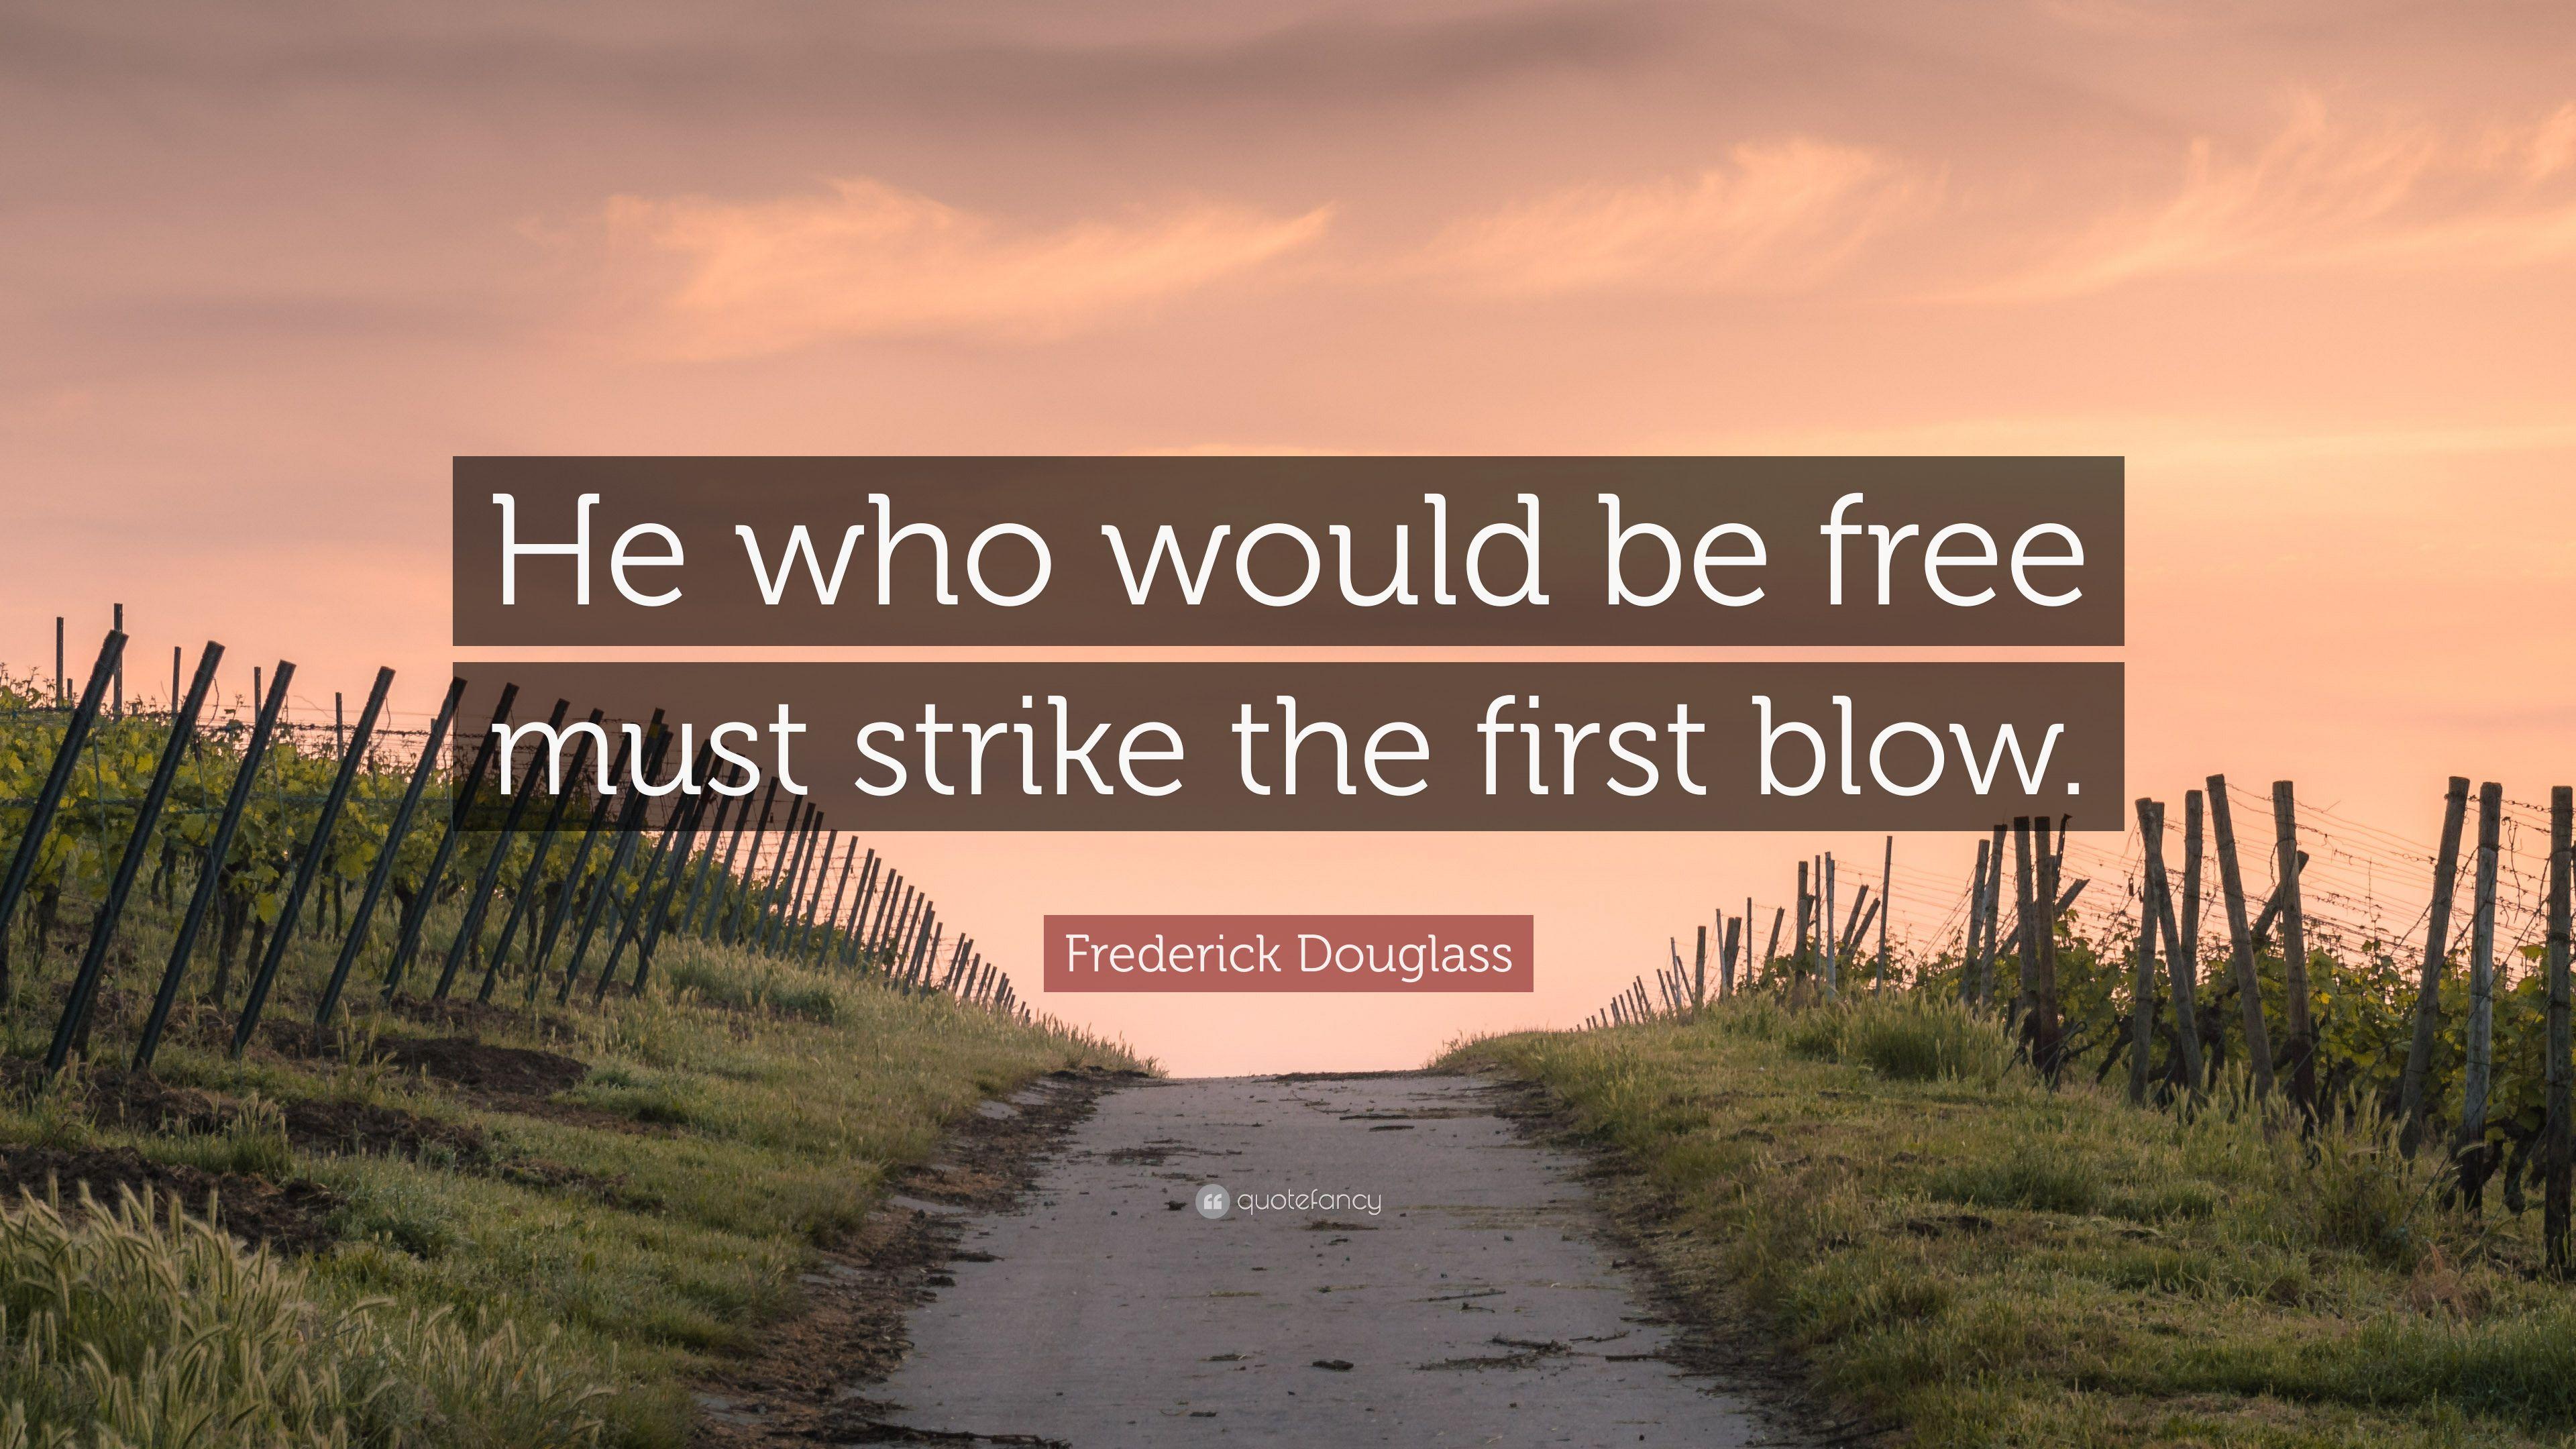 Frederick Douglass Quote: “He who would be free must strike